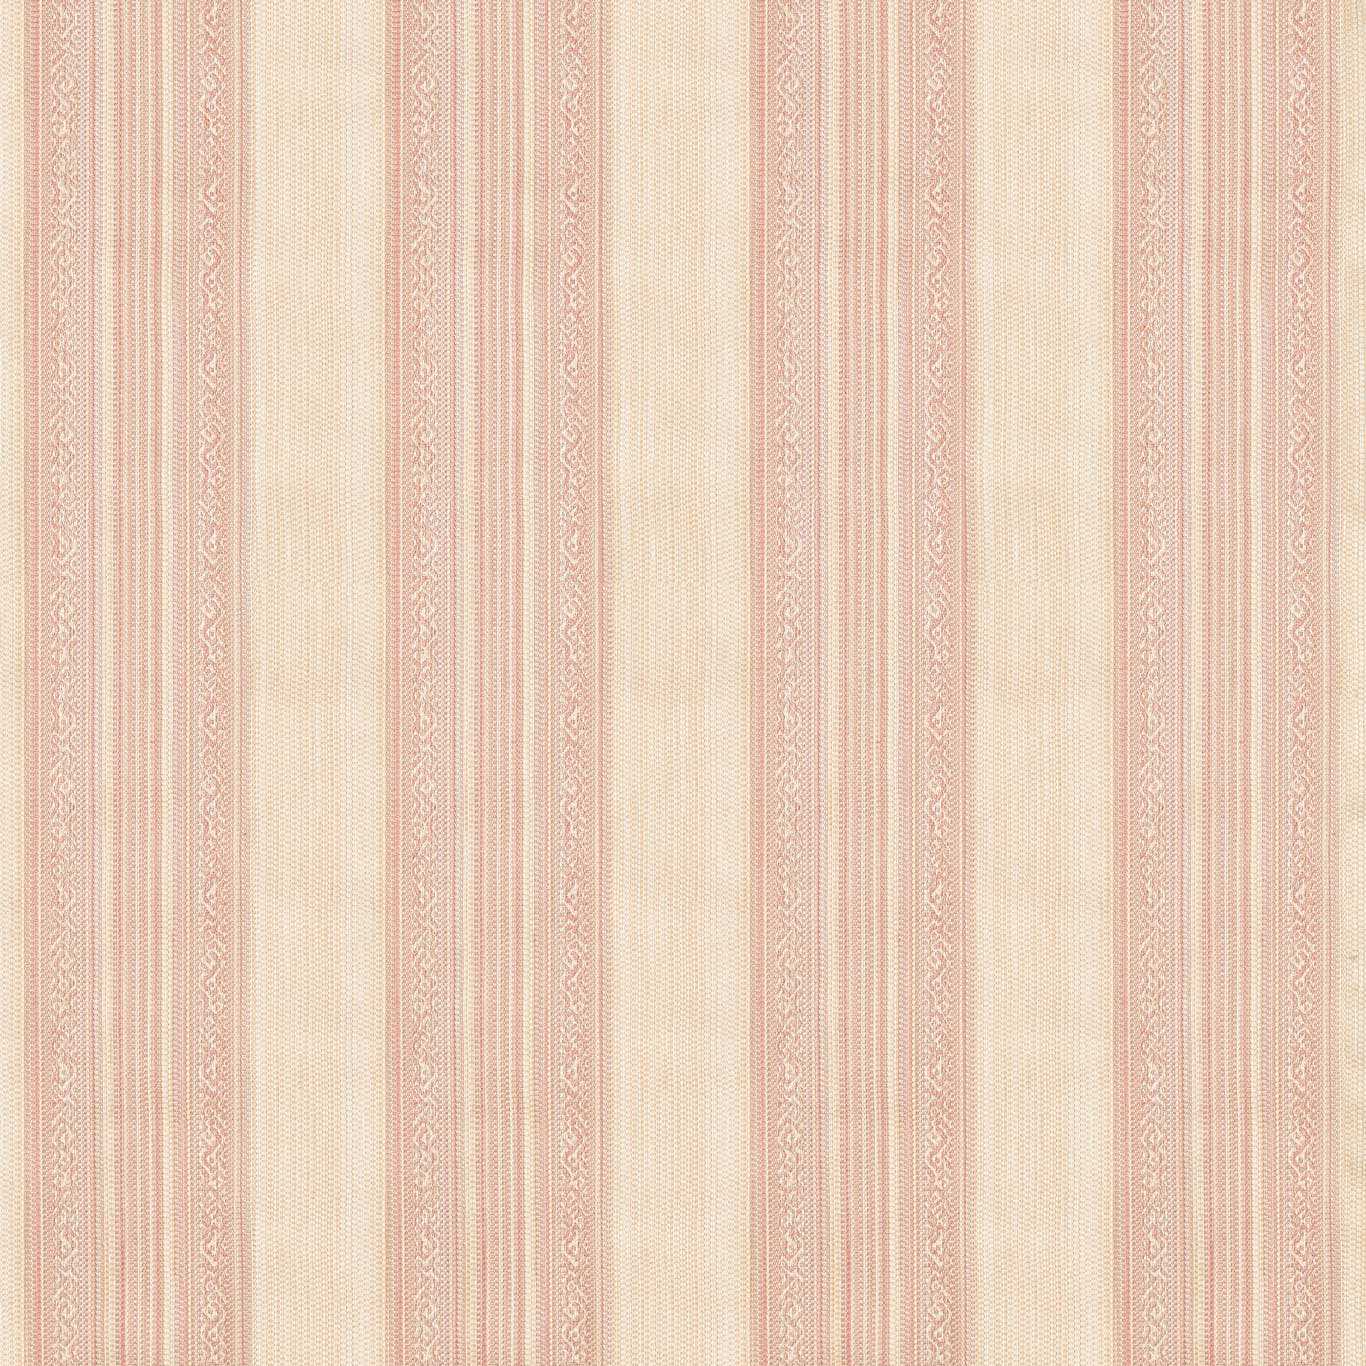 Hanover Stripe Tuscan Pink Fabric by ZOF